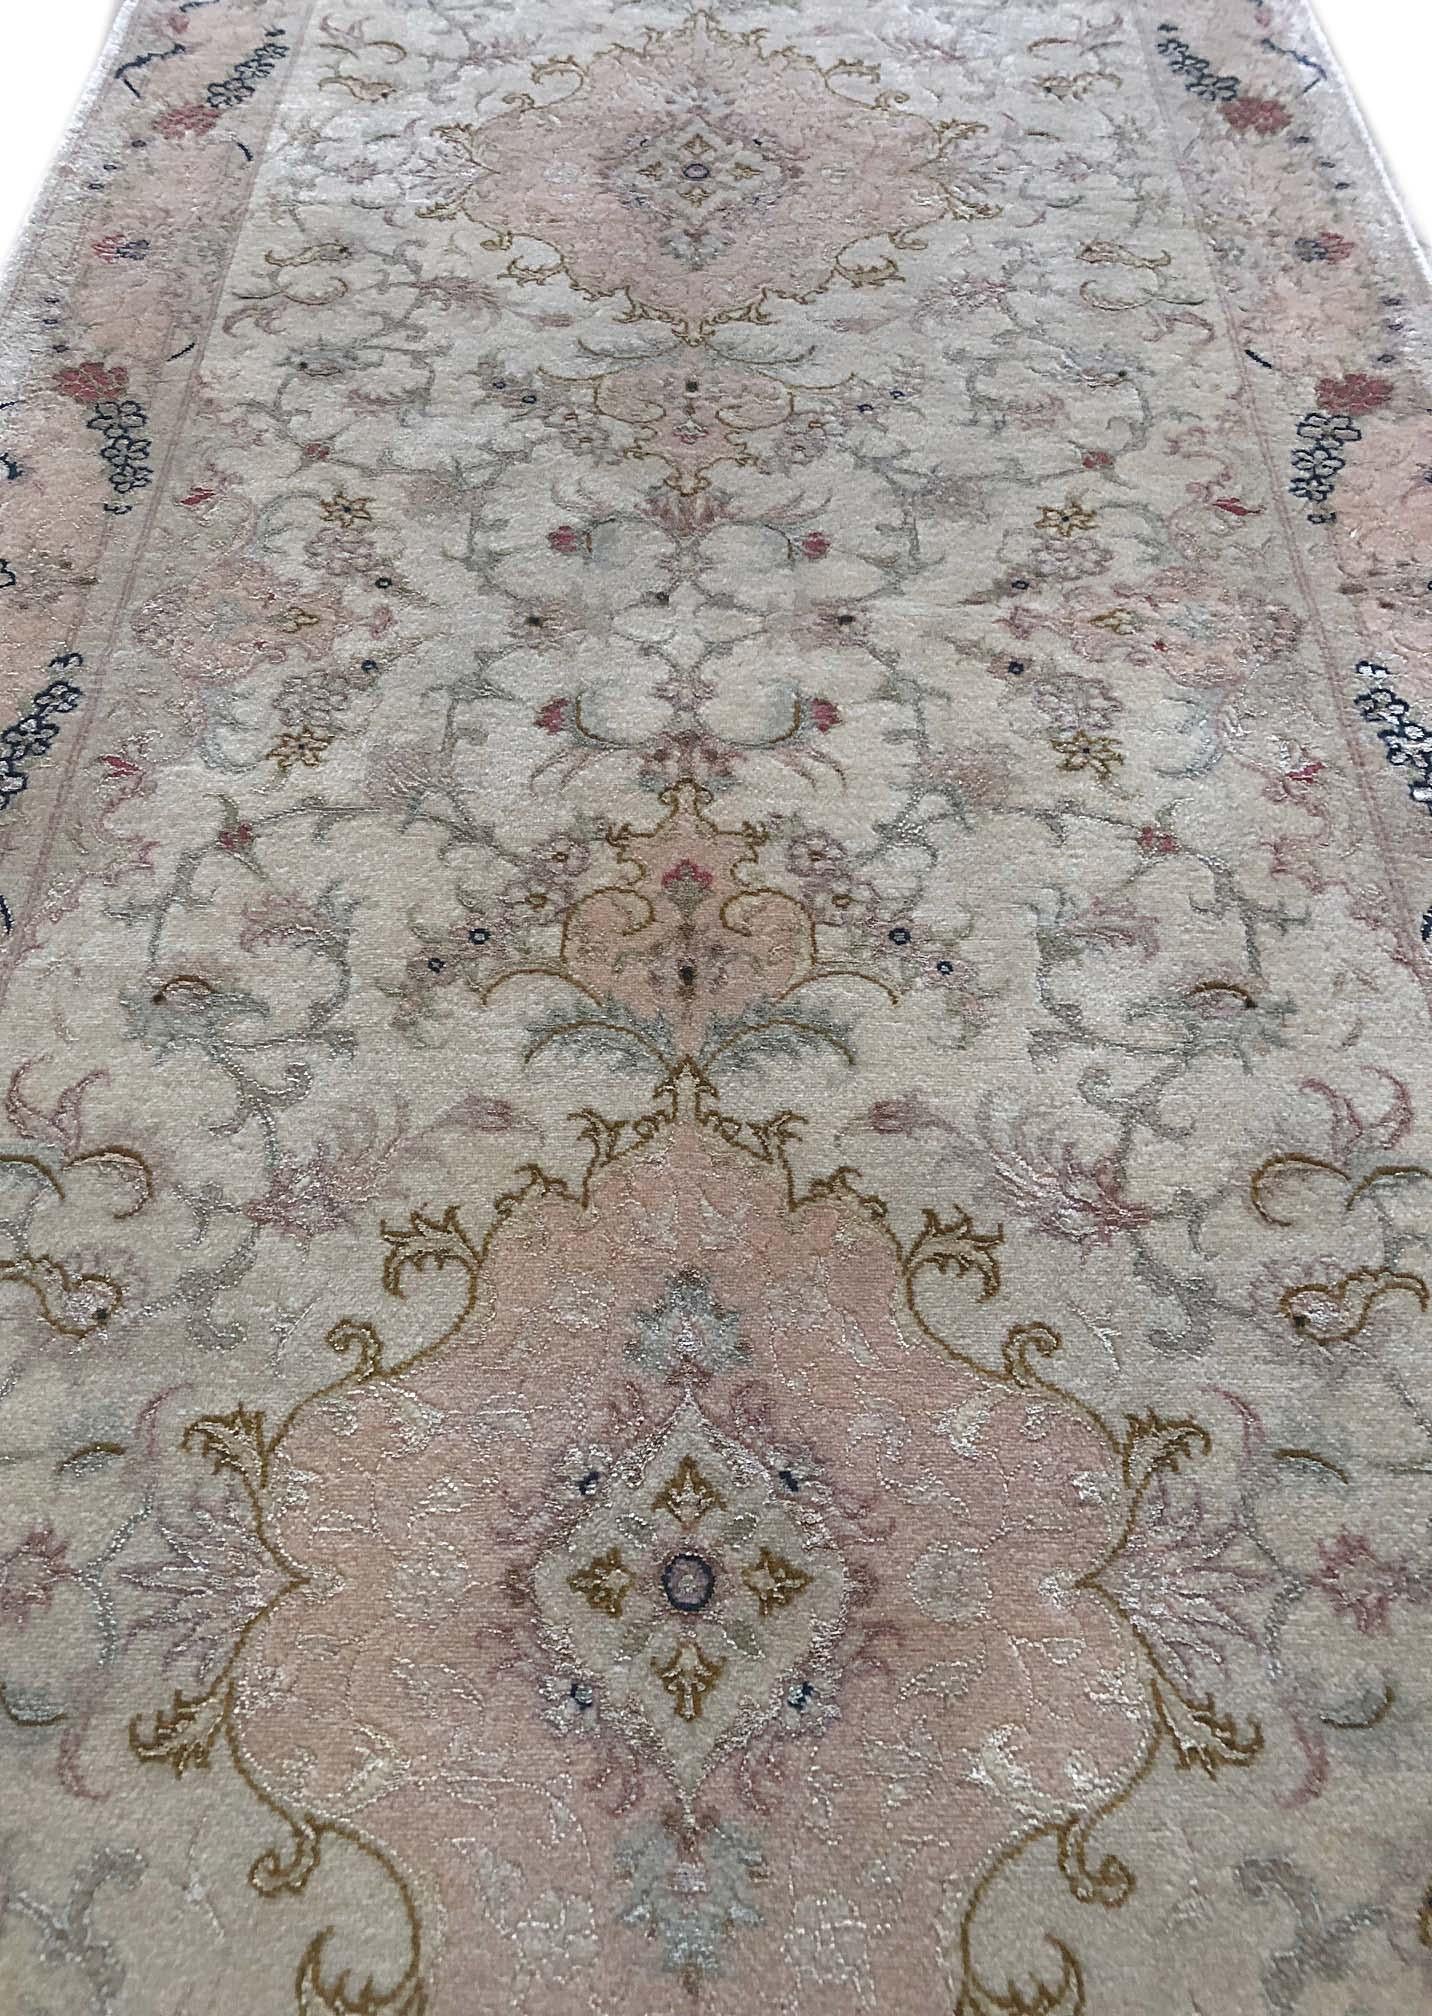 Contemporary Authentic Persian Hand Knotted Repeated Medallion Floral Tabriz Runner Rug For Sale